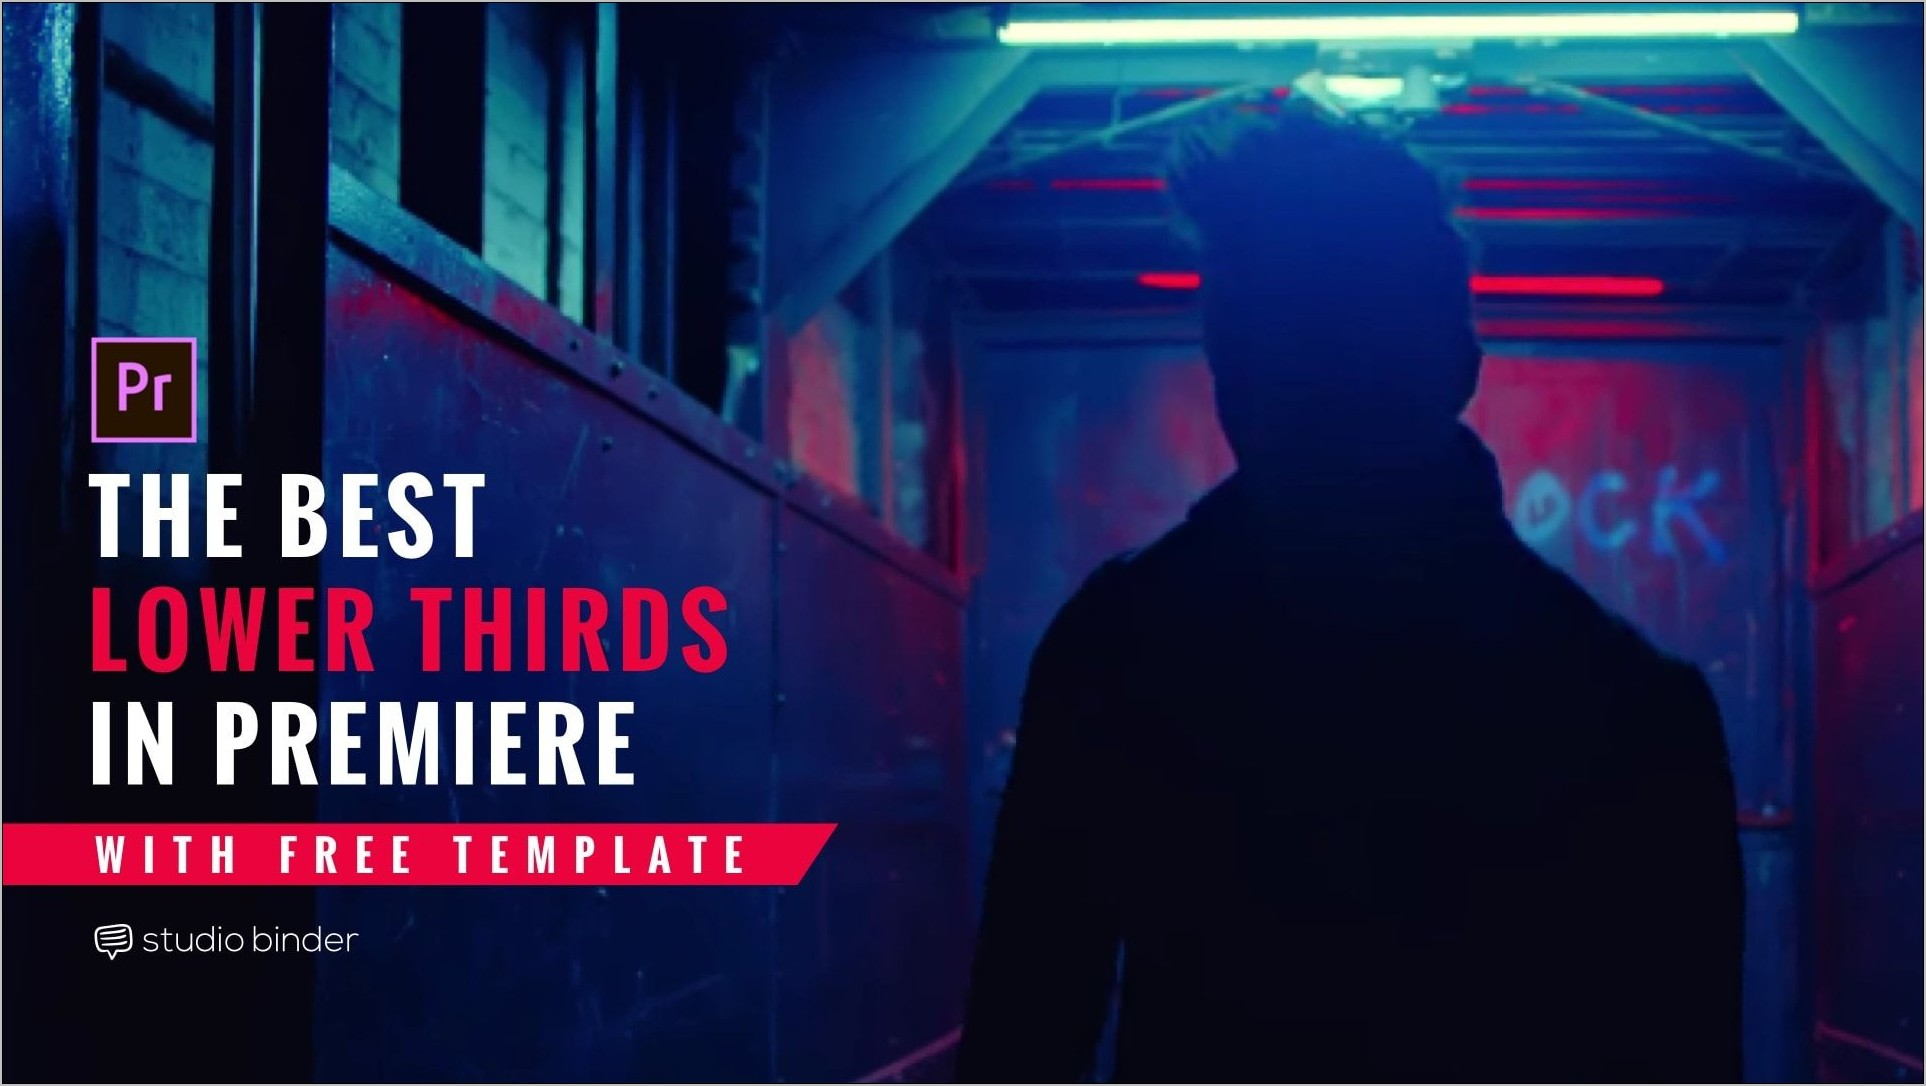 Premiere Lower Thirds Templates Free